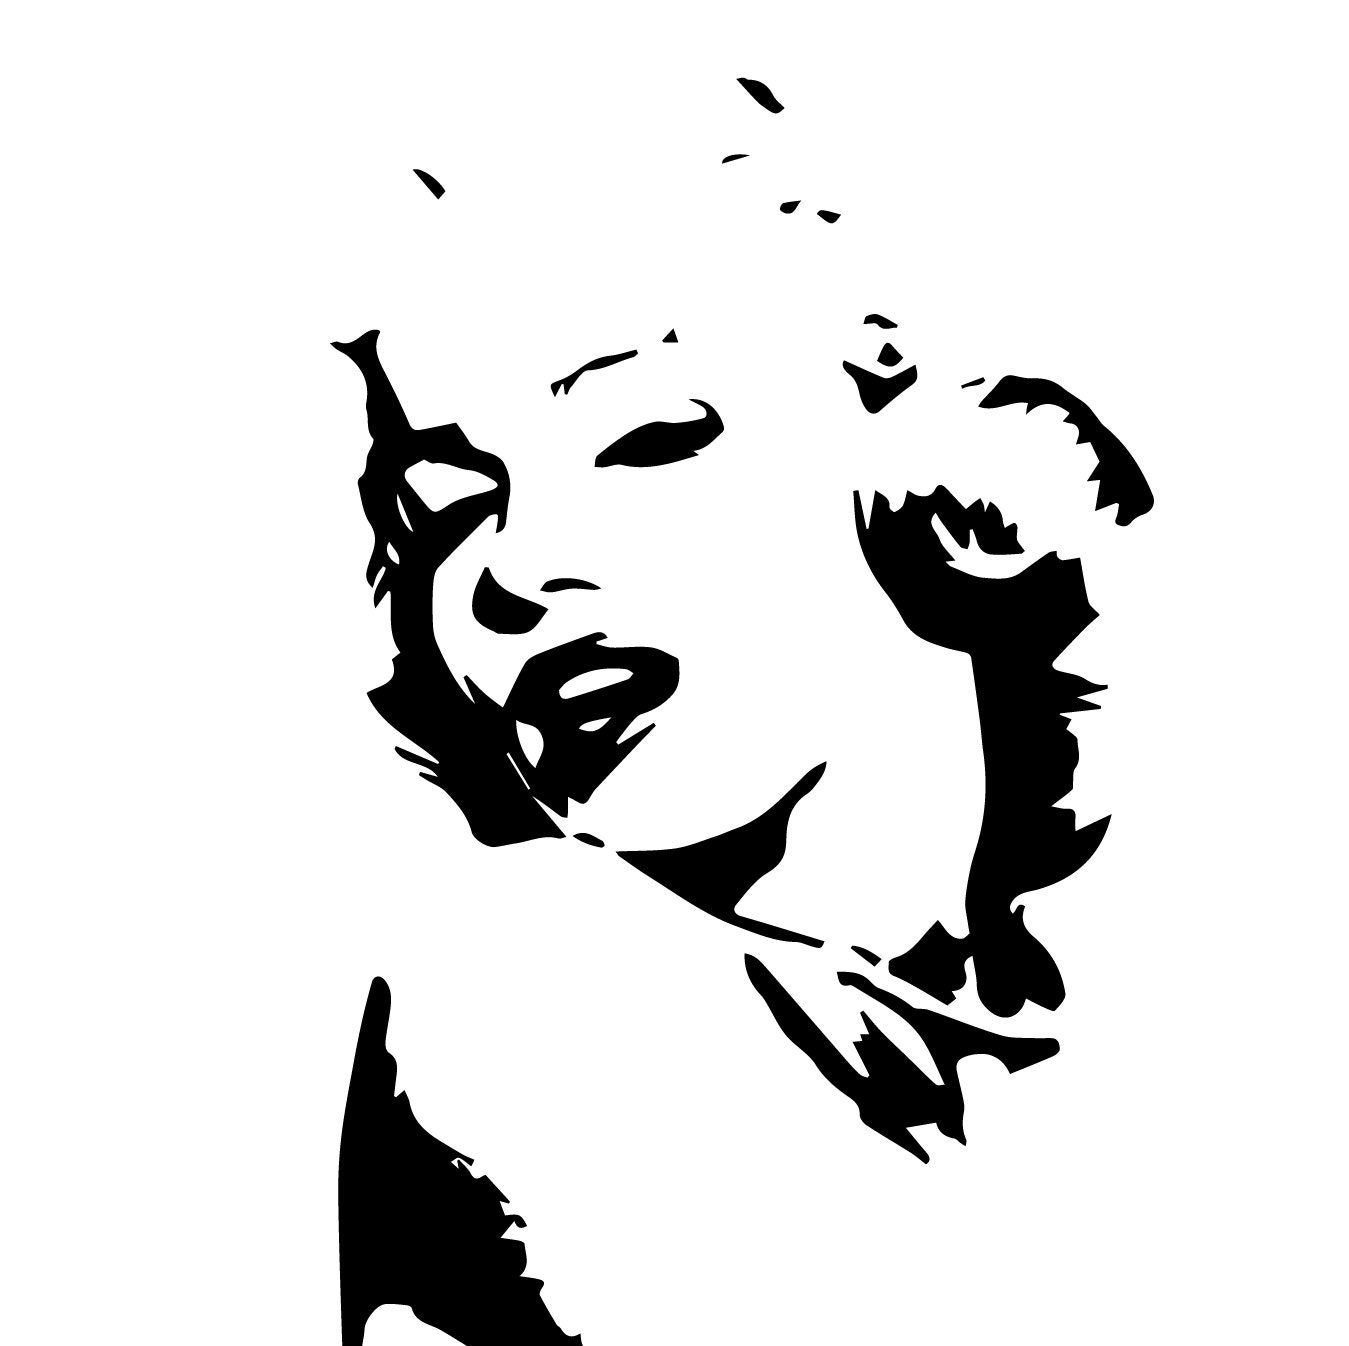 Marilyn monroe stencil svg file available for instant download online in th...